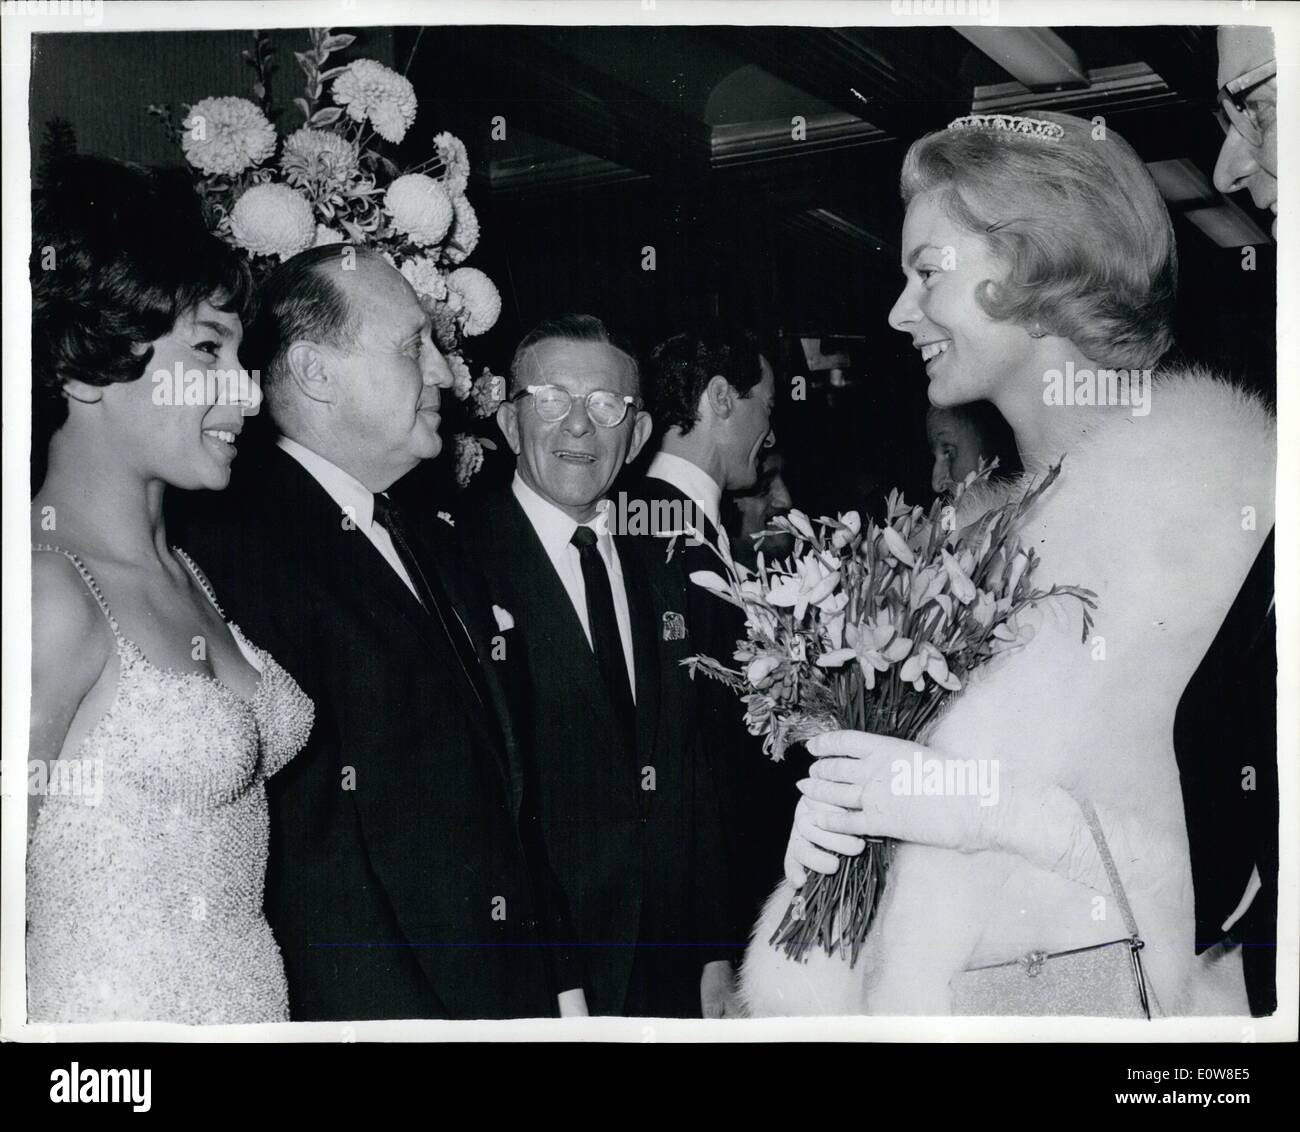 Nov. 11, 1961 - Royal variety performance held in London last night: Photo shows following the Royal Variety Peformance at the Prince of Wales theatre, London, last night, members of the Royal Family met a number of the stars backstage. Here H.R.H. The Duchess of Kent is seen chatting with singing star Shirley Bassey. Jack Benny is seen standing next to Miss Bassey. Stock Photo